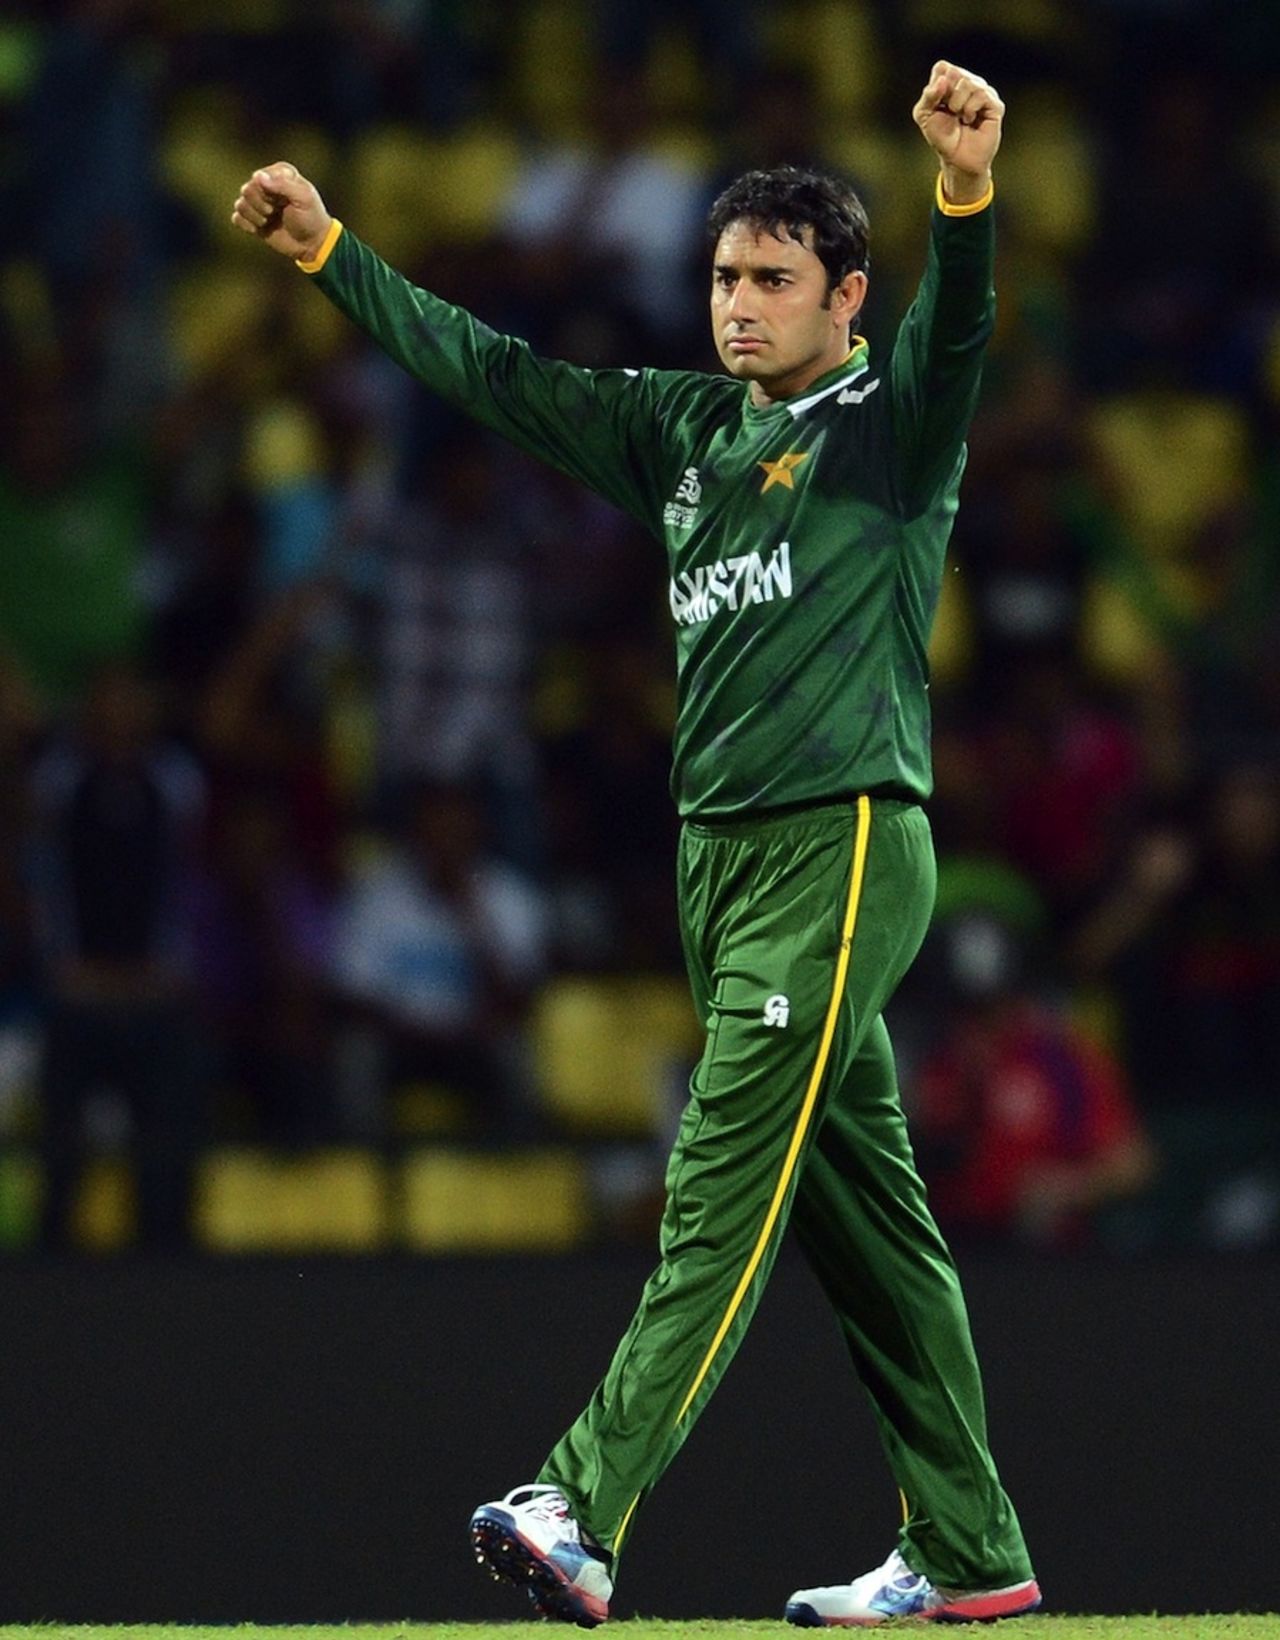 Saeed Ajmal raises his arms after picking up a wicket, New Zealand v Pakistan, World T20 2012, Group D, Pallekele, September, 23, 2012